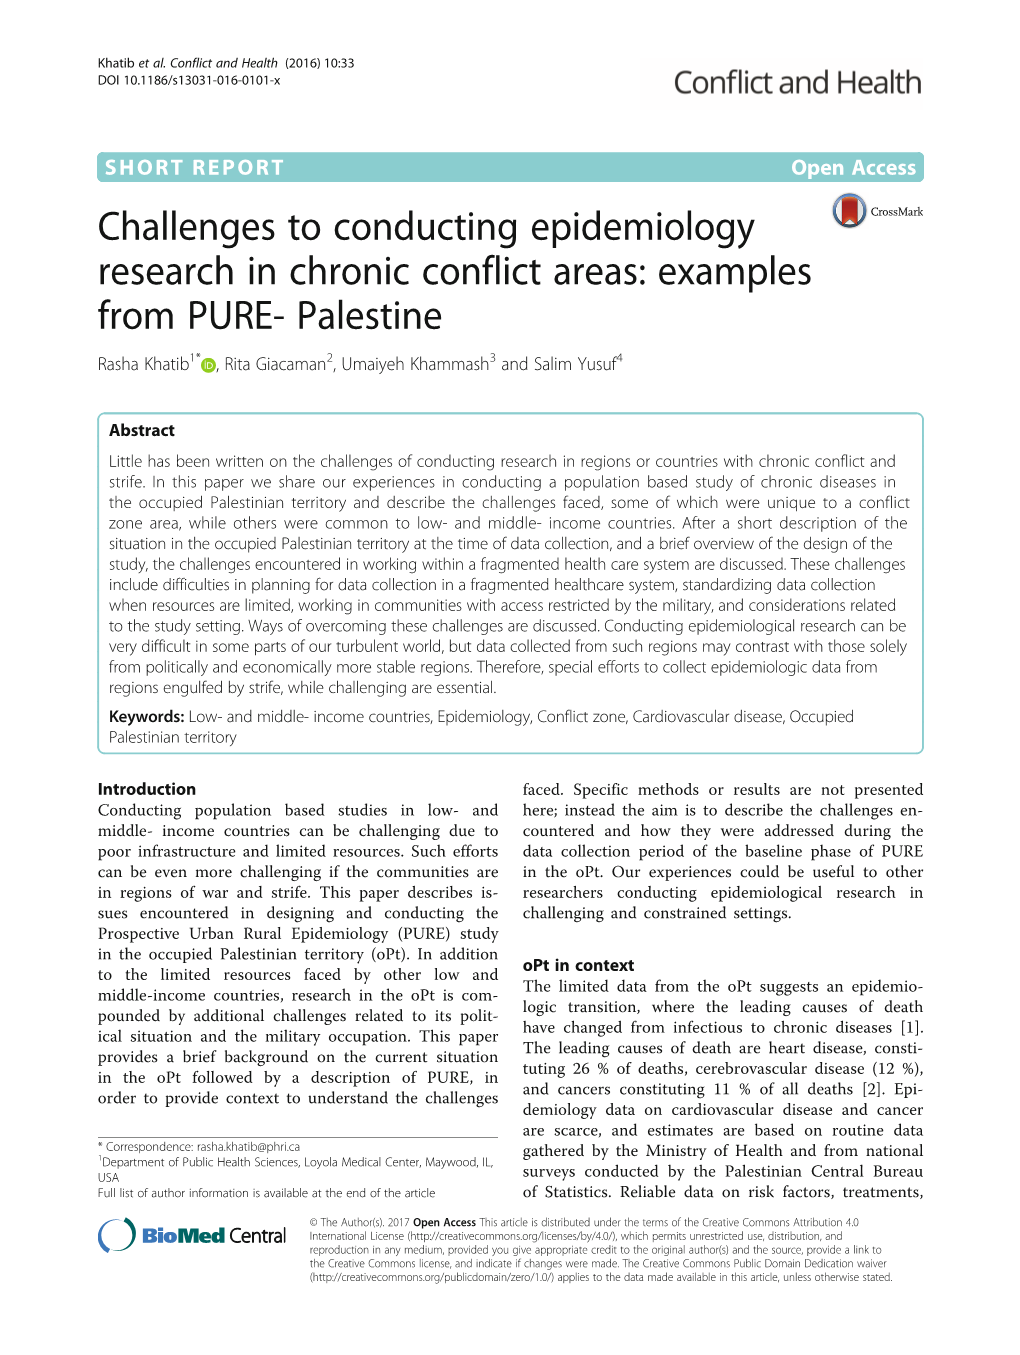 Challenges to Conducting Epidemiology Research in Chronic